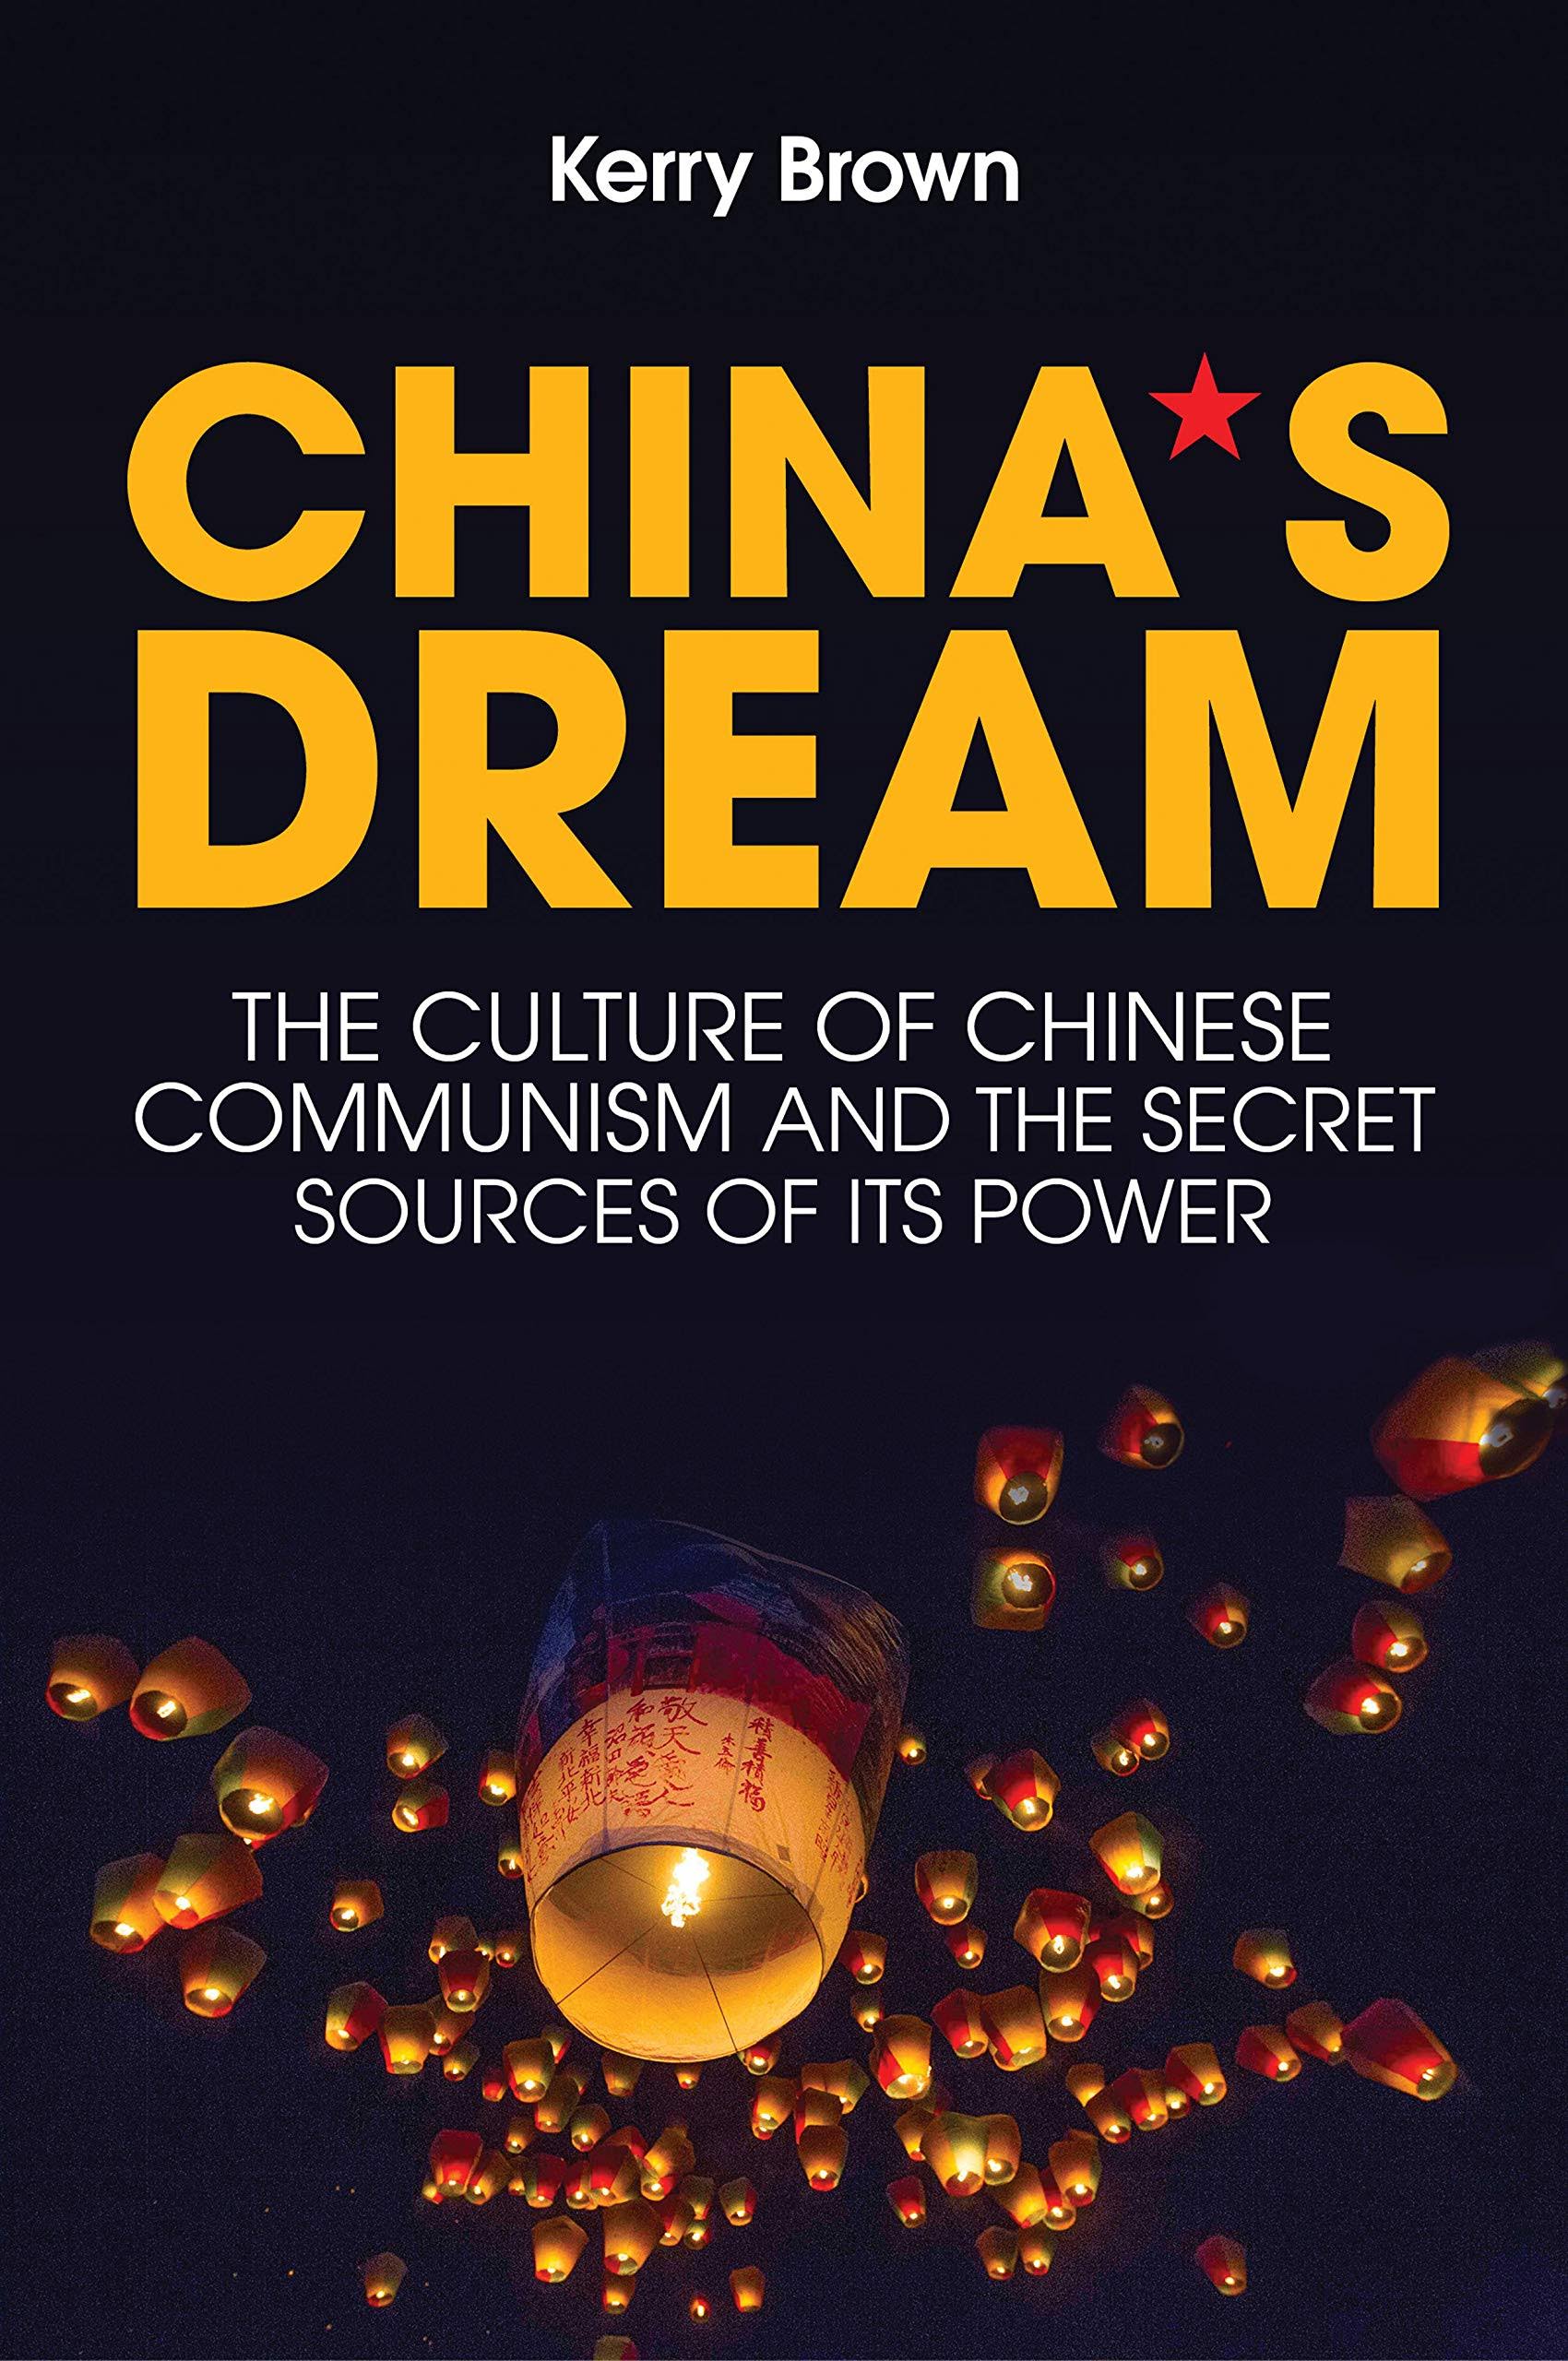 China's Dream by Kerry Brown